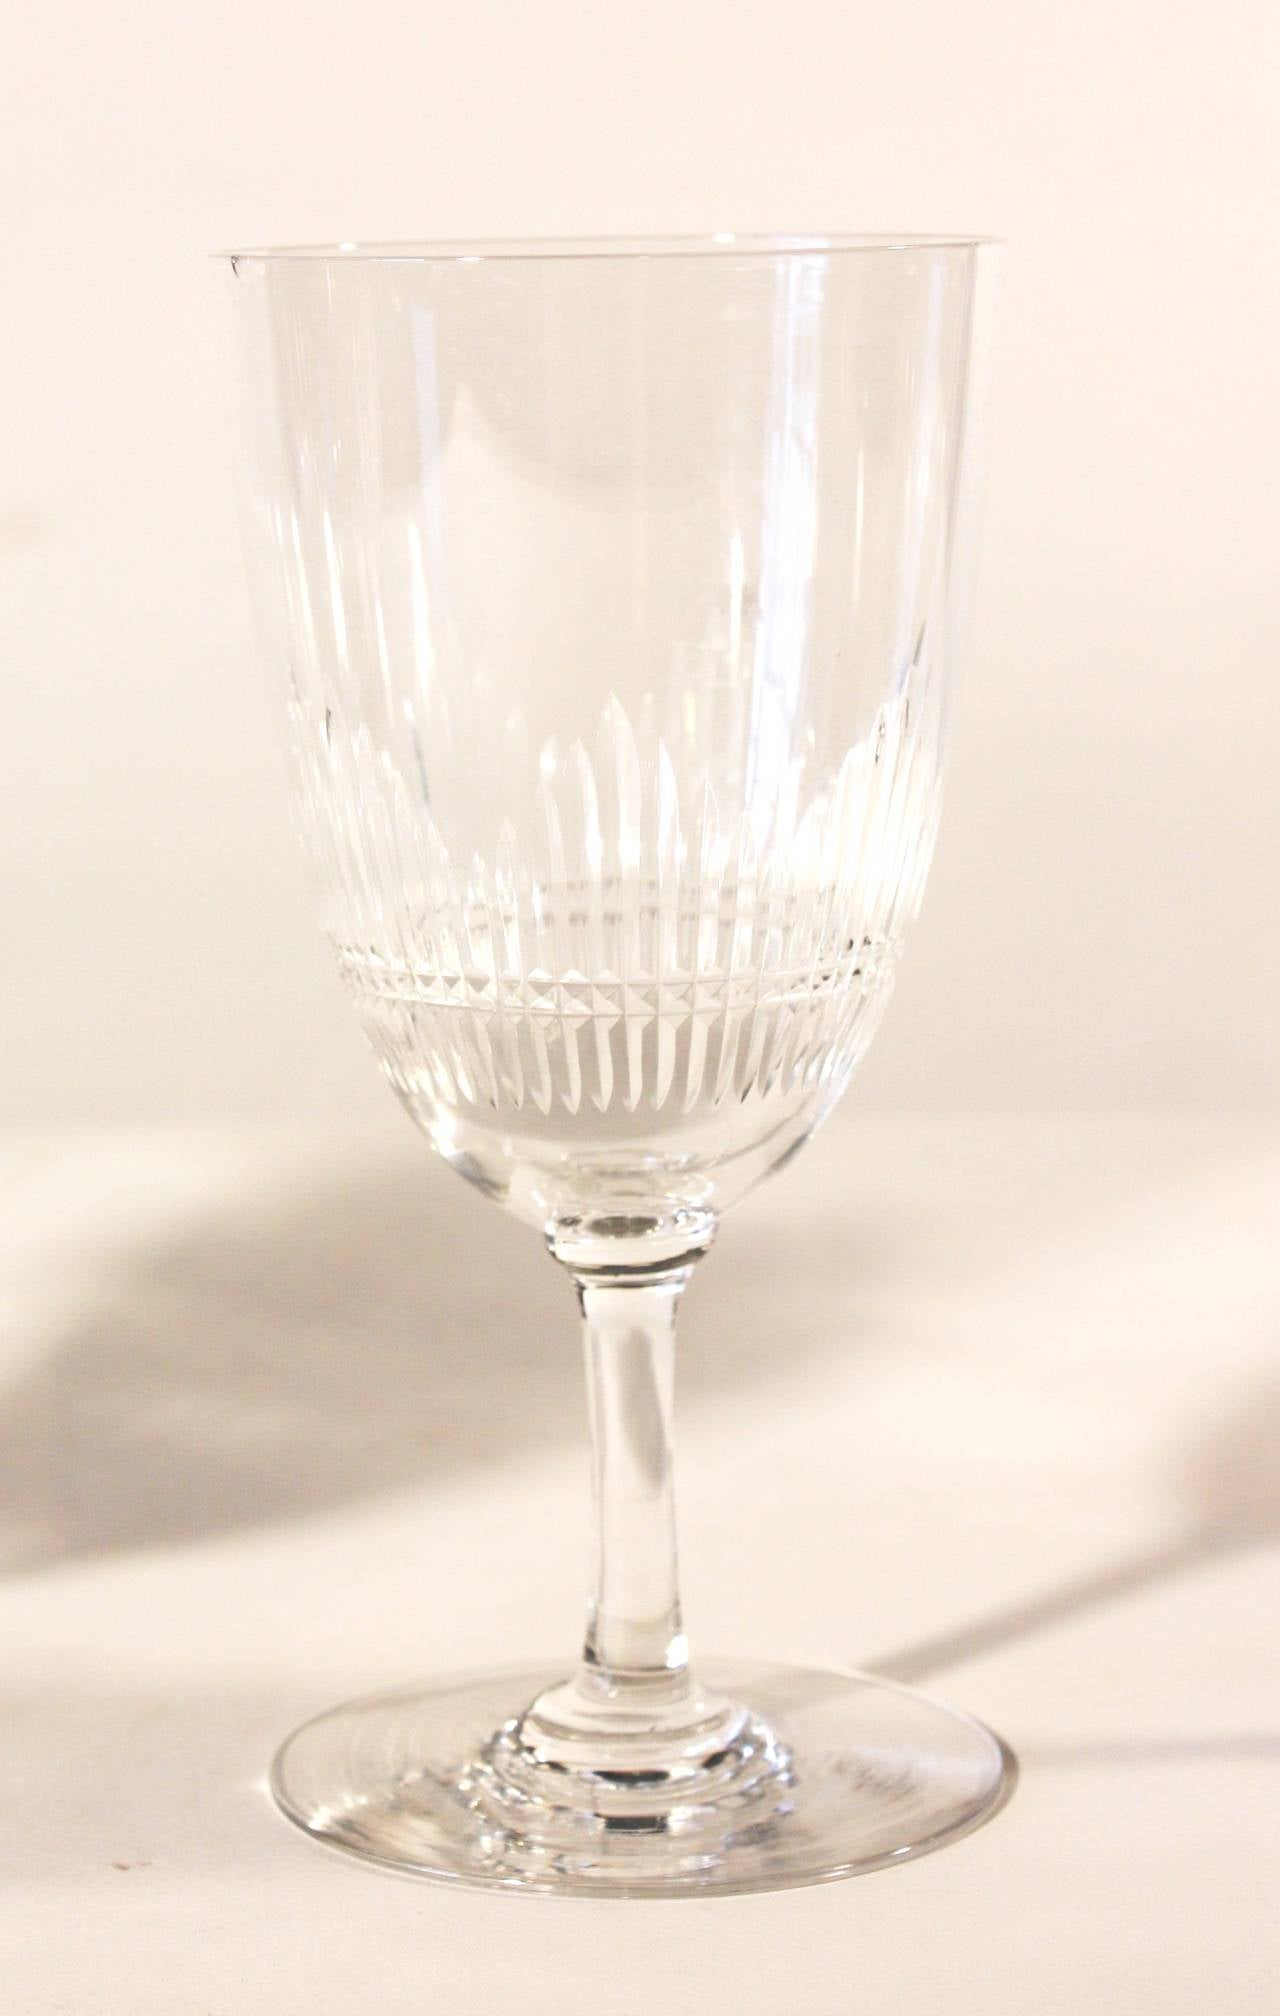 A nice set of 24 stem glasses in three sizes, circa 1940, French crystal